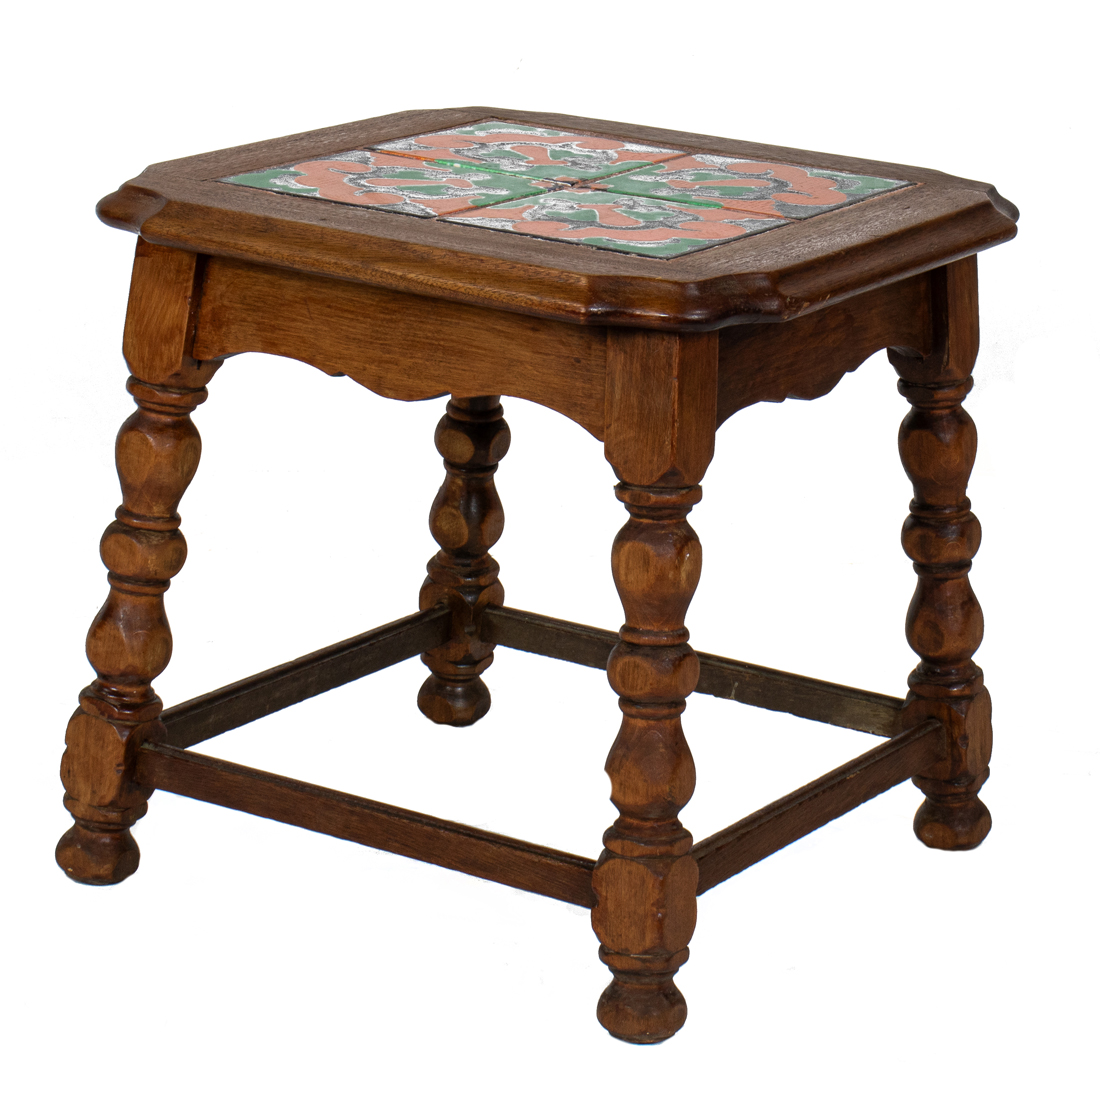 A MONTEREY STYLE TILE TOP TABLE 3b4203